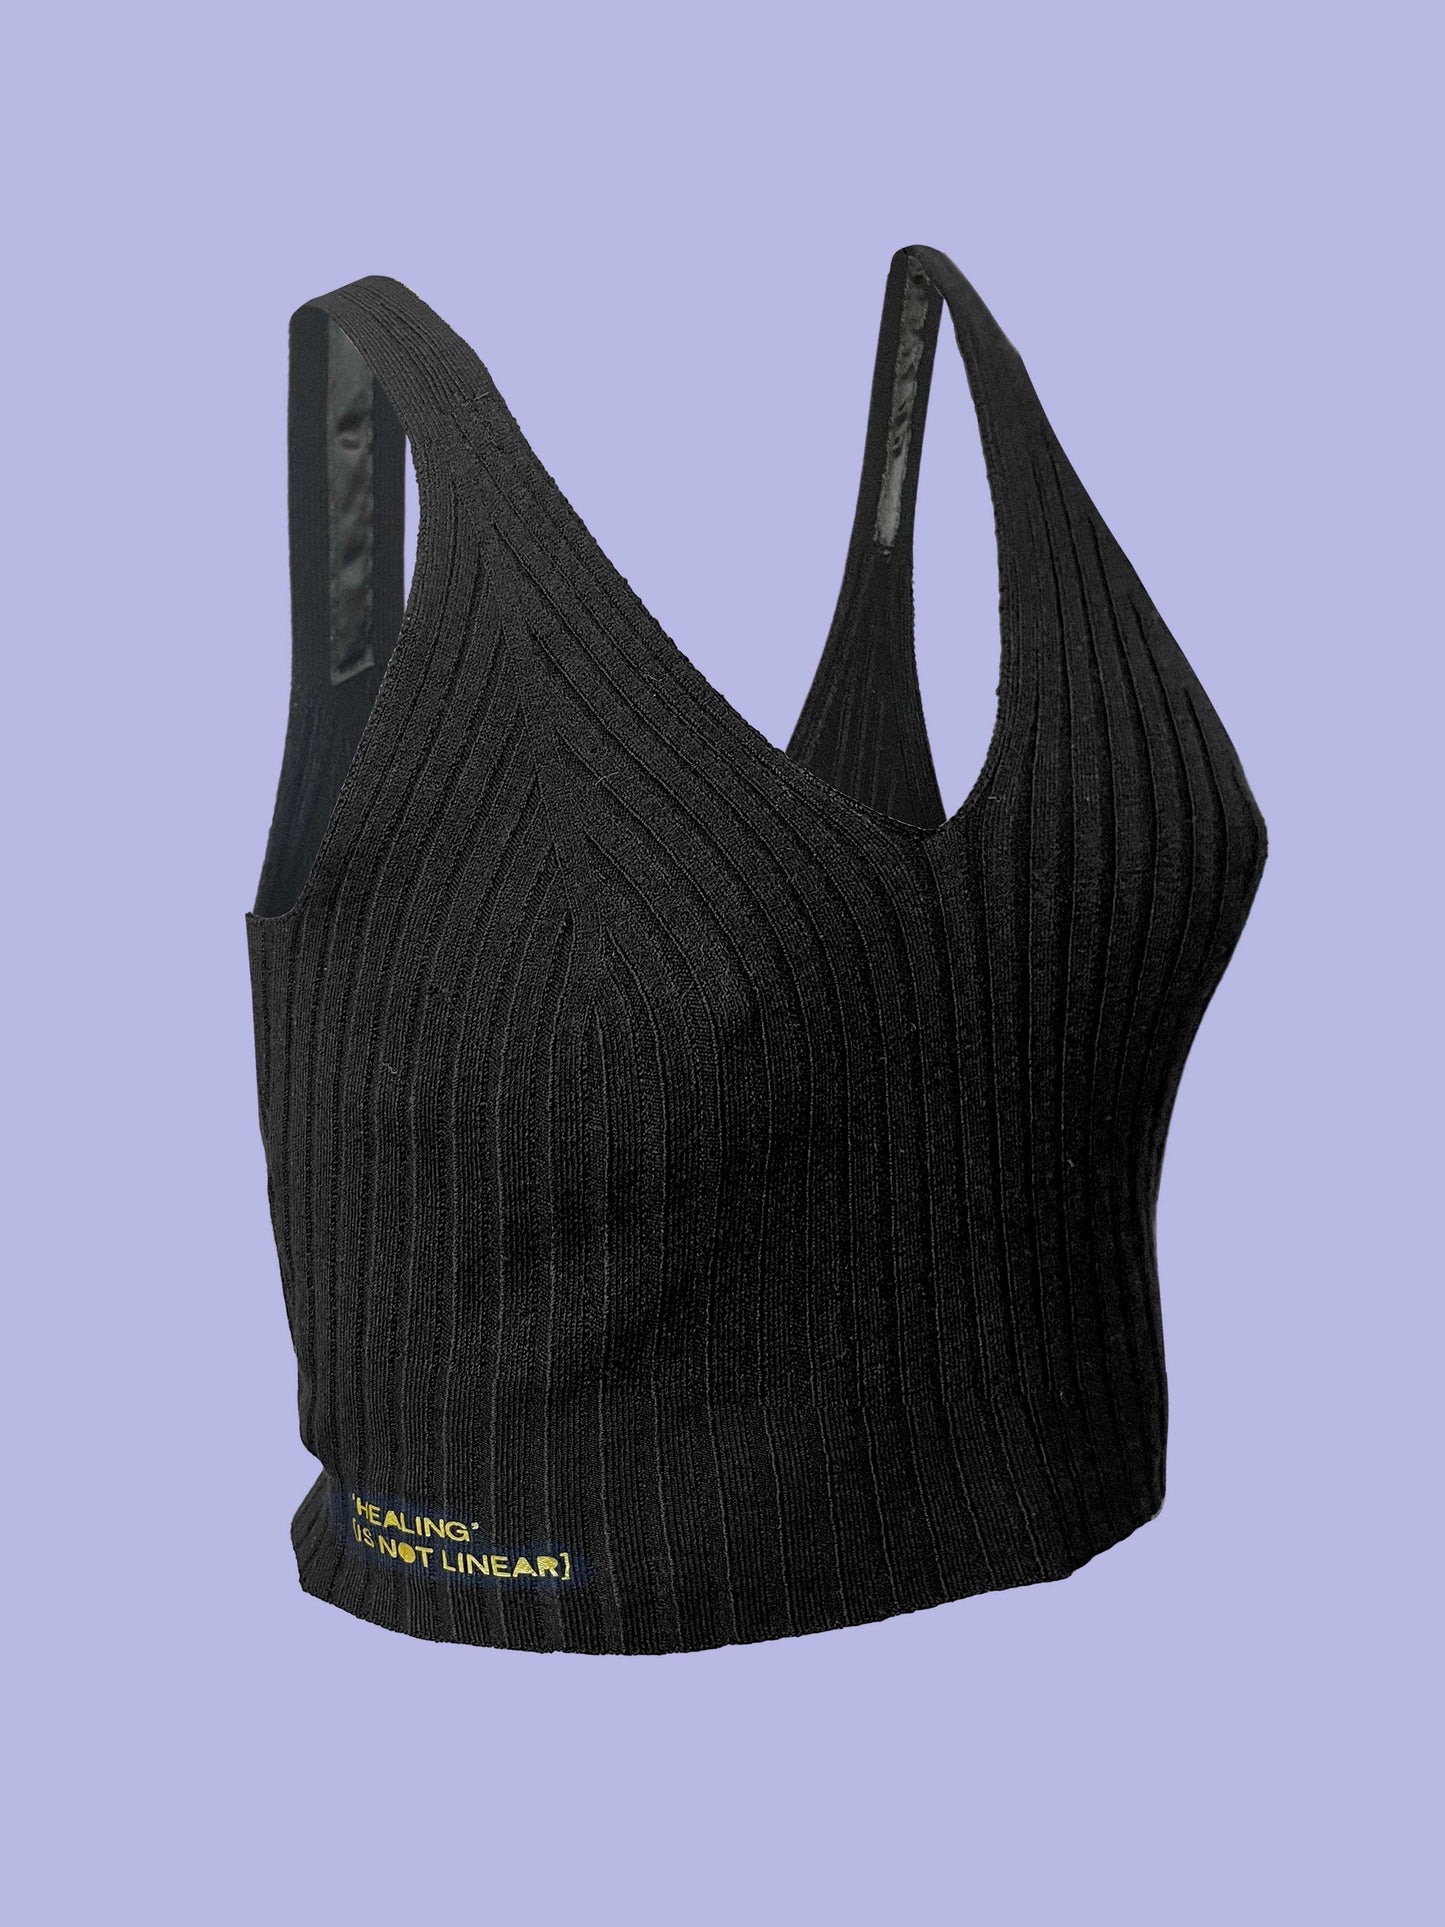 This is The Remix Top HEALING IS NOT LINEAR - Knitted Crop Top in Black